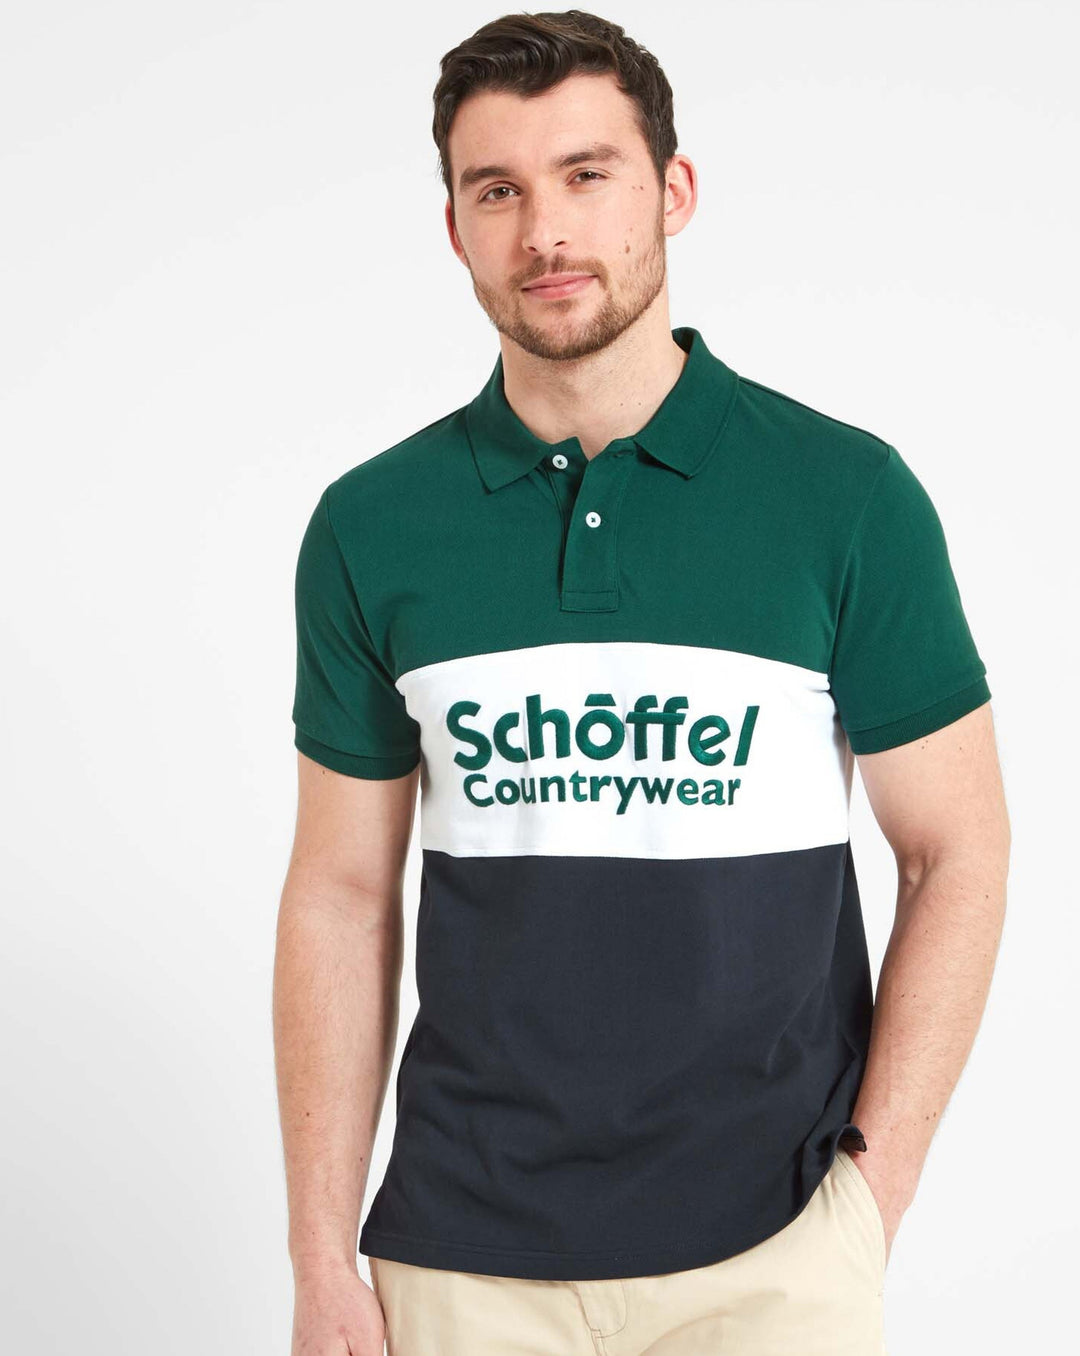 The Schoffel Mens Exeter Heritage Polo Shirt in Navy#Navy